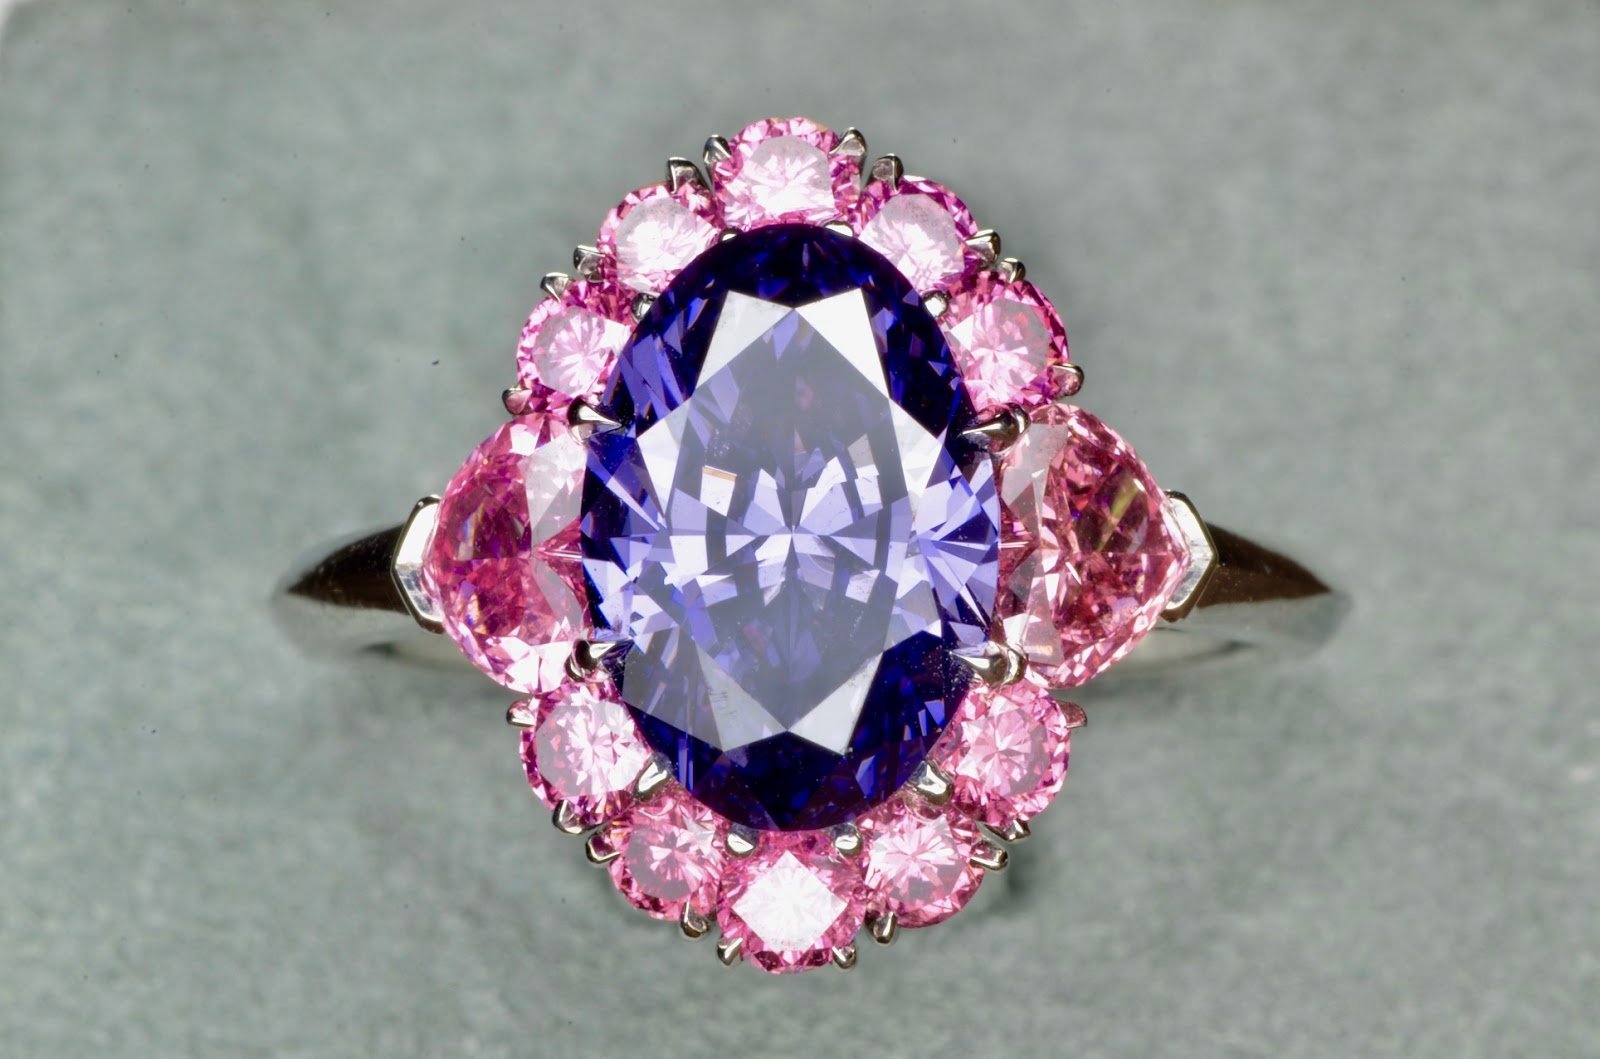 Why Choose a Unique Pink Argyle Diamond for Engagement Ring?